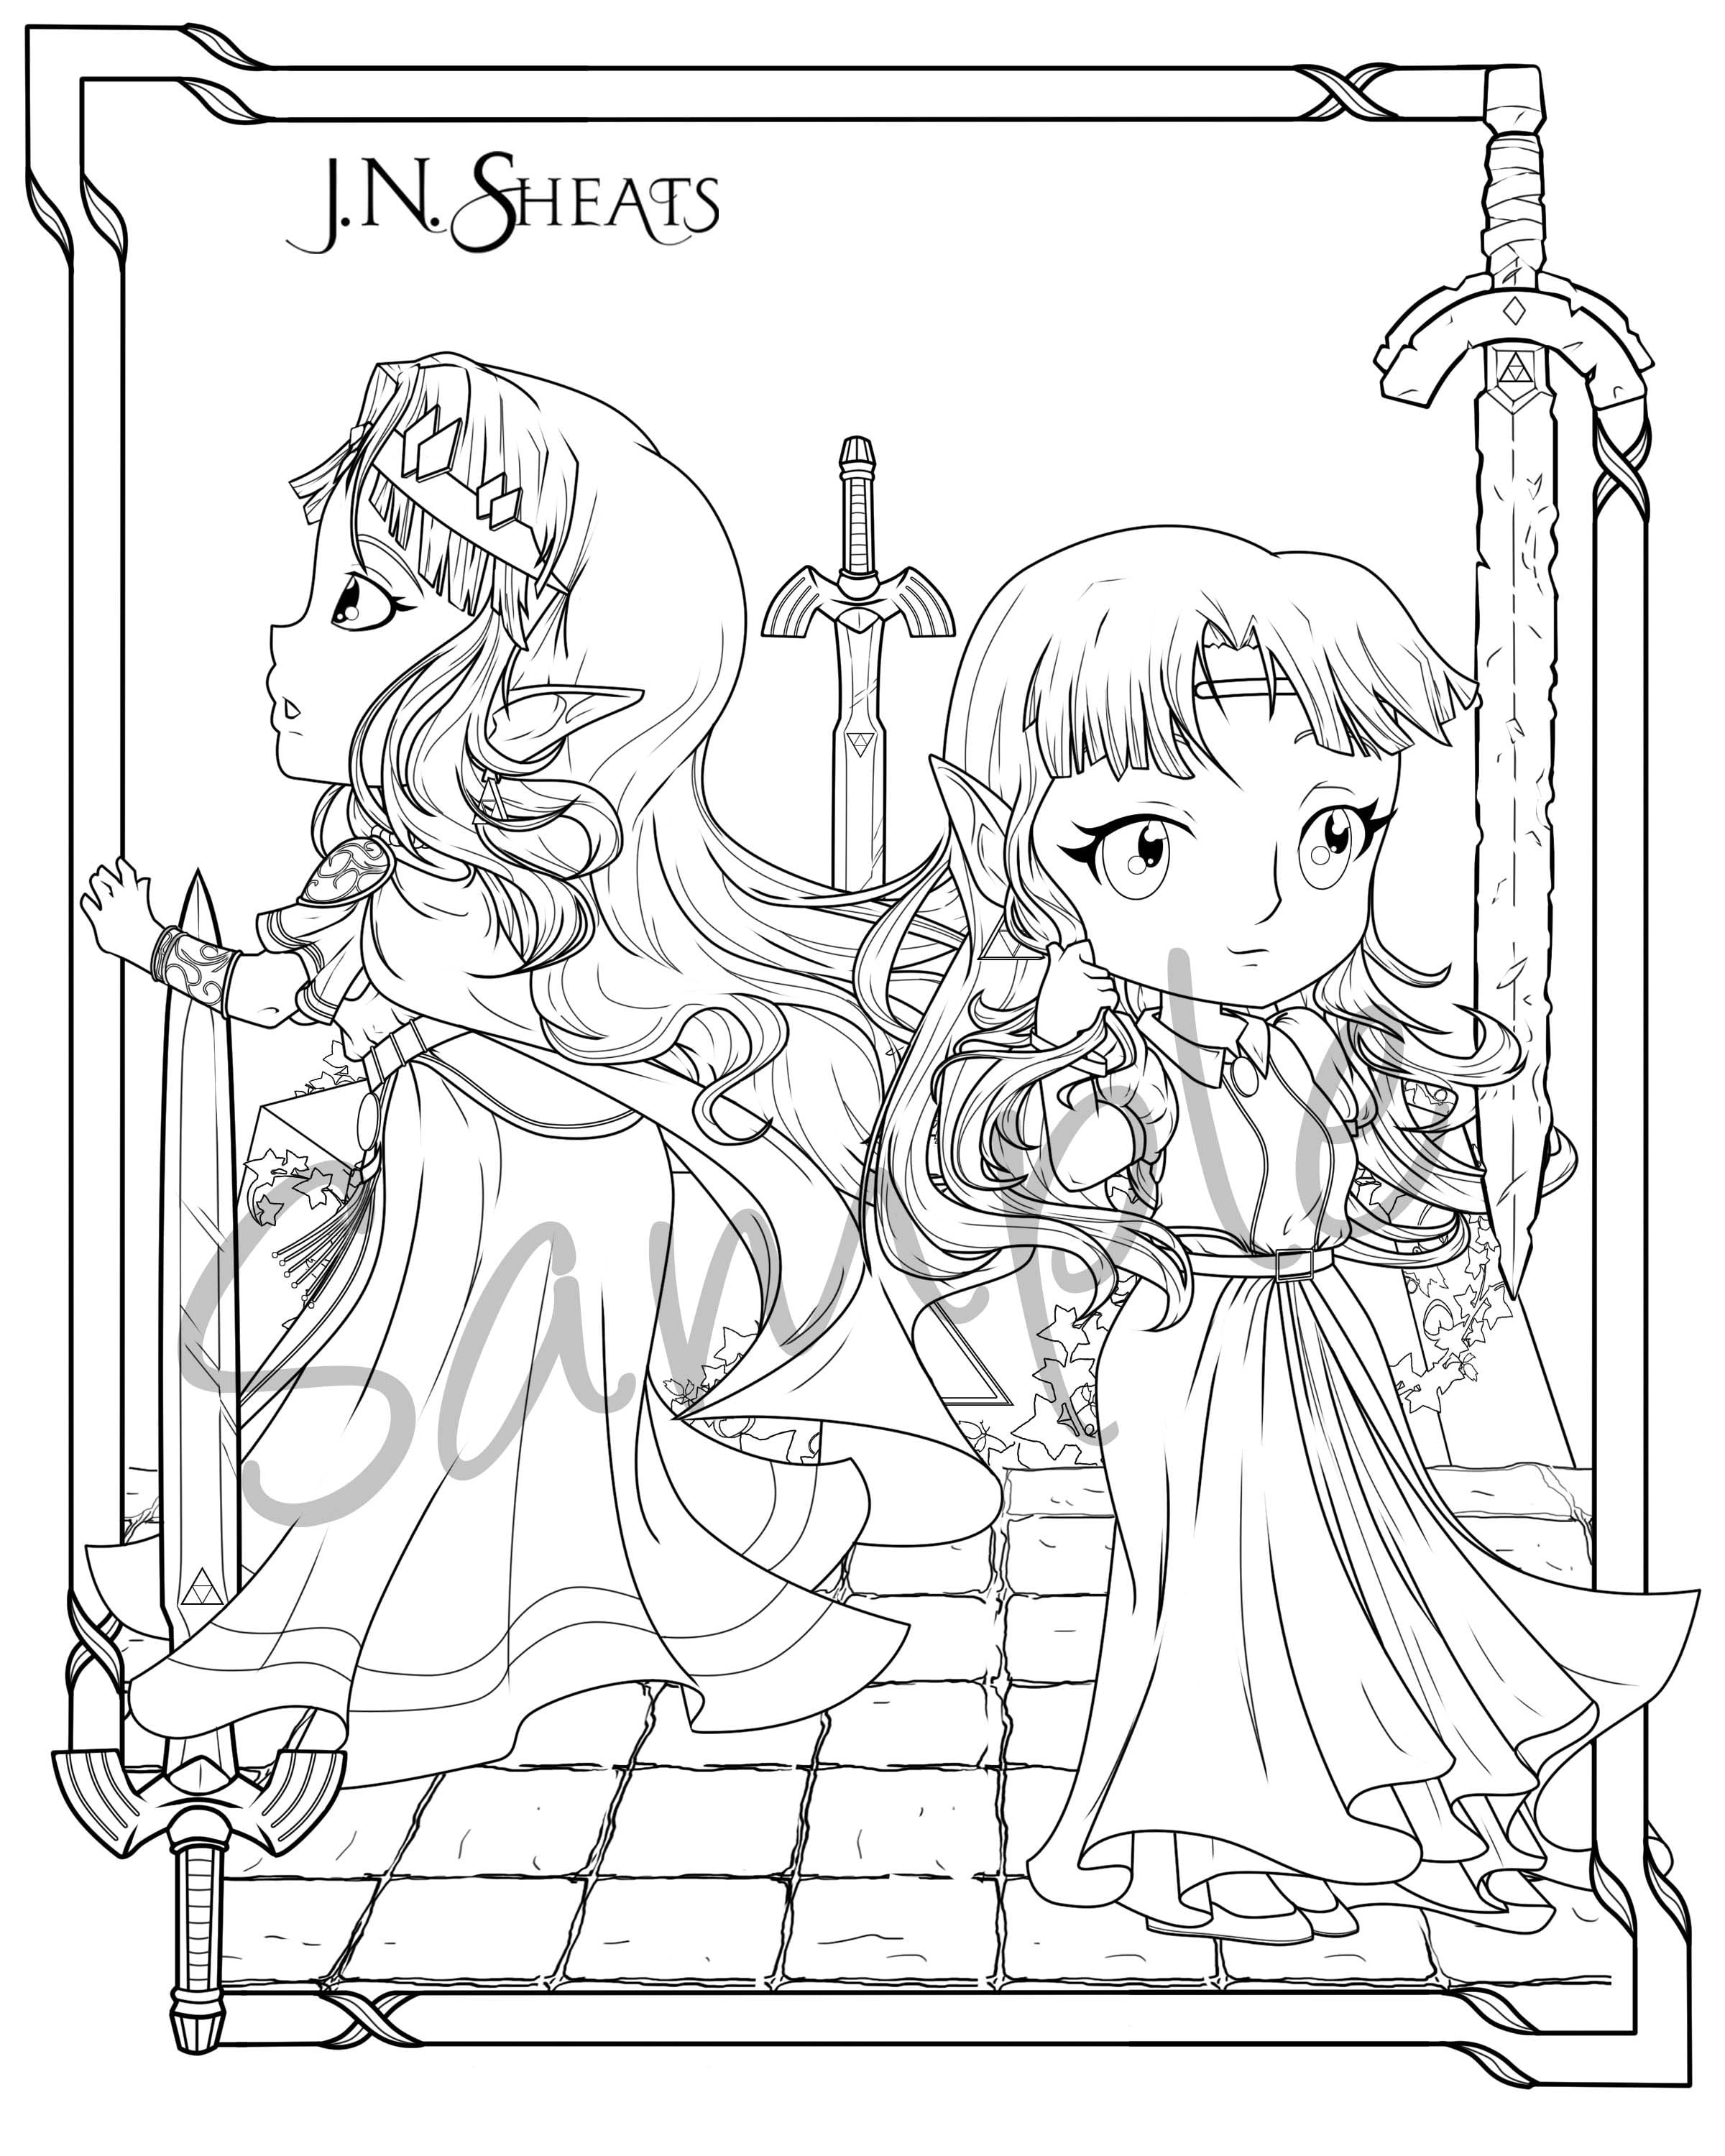 Princess zelda a link to the past coloring page downloads for instant download